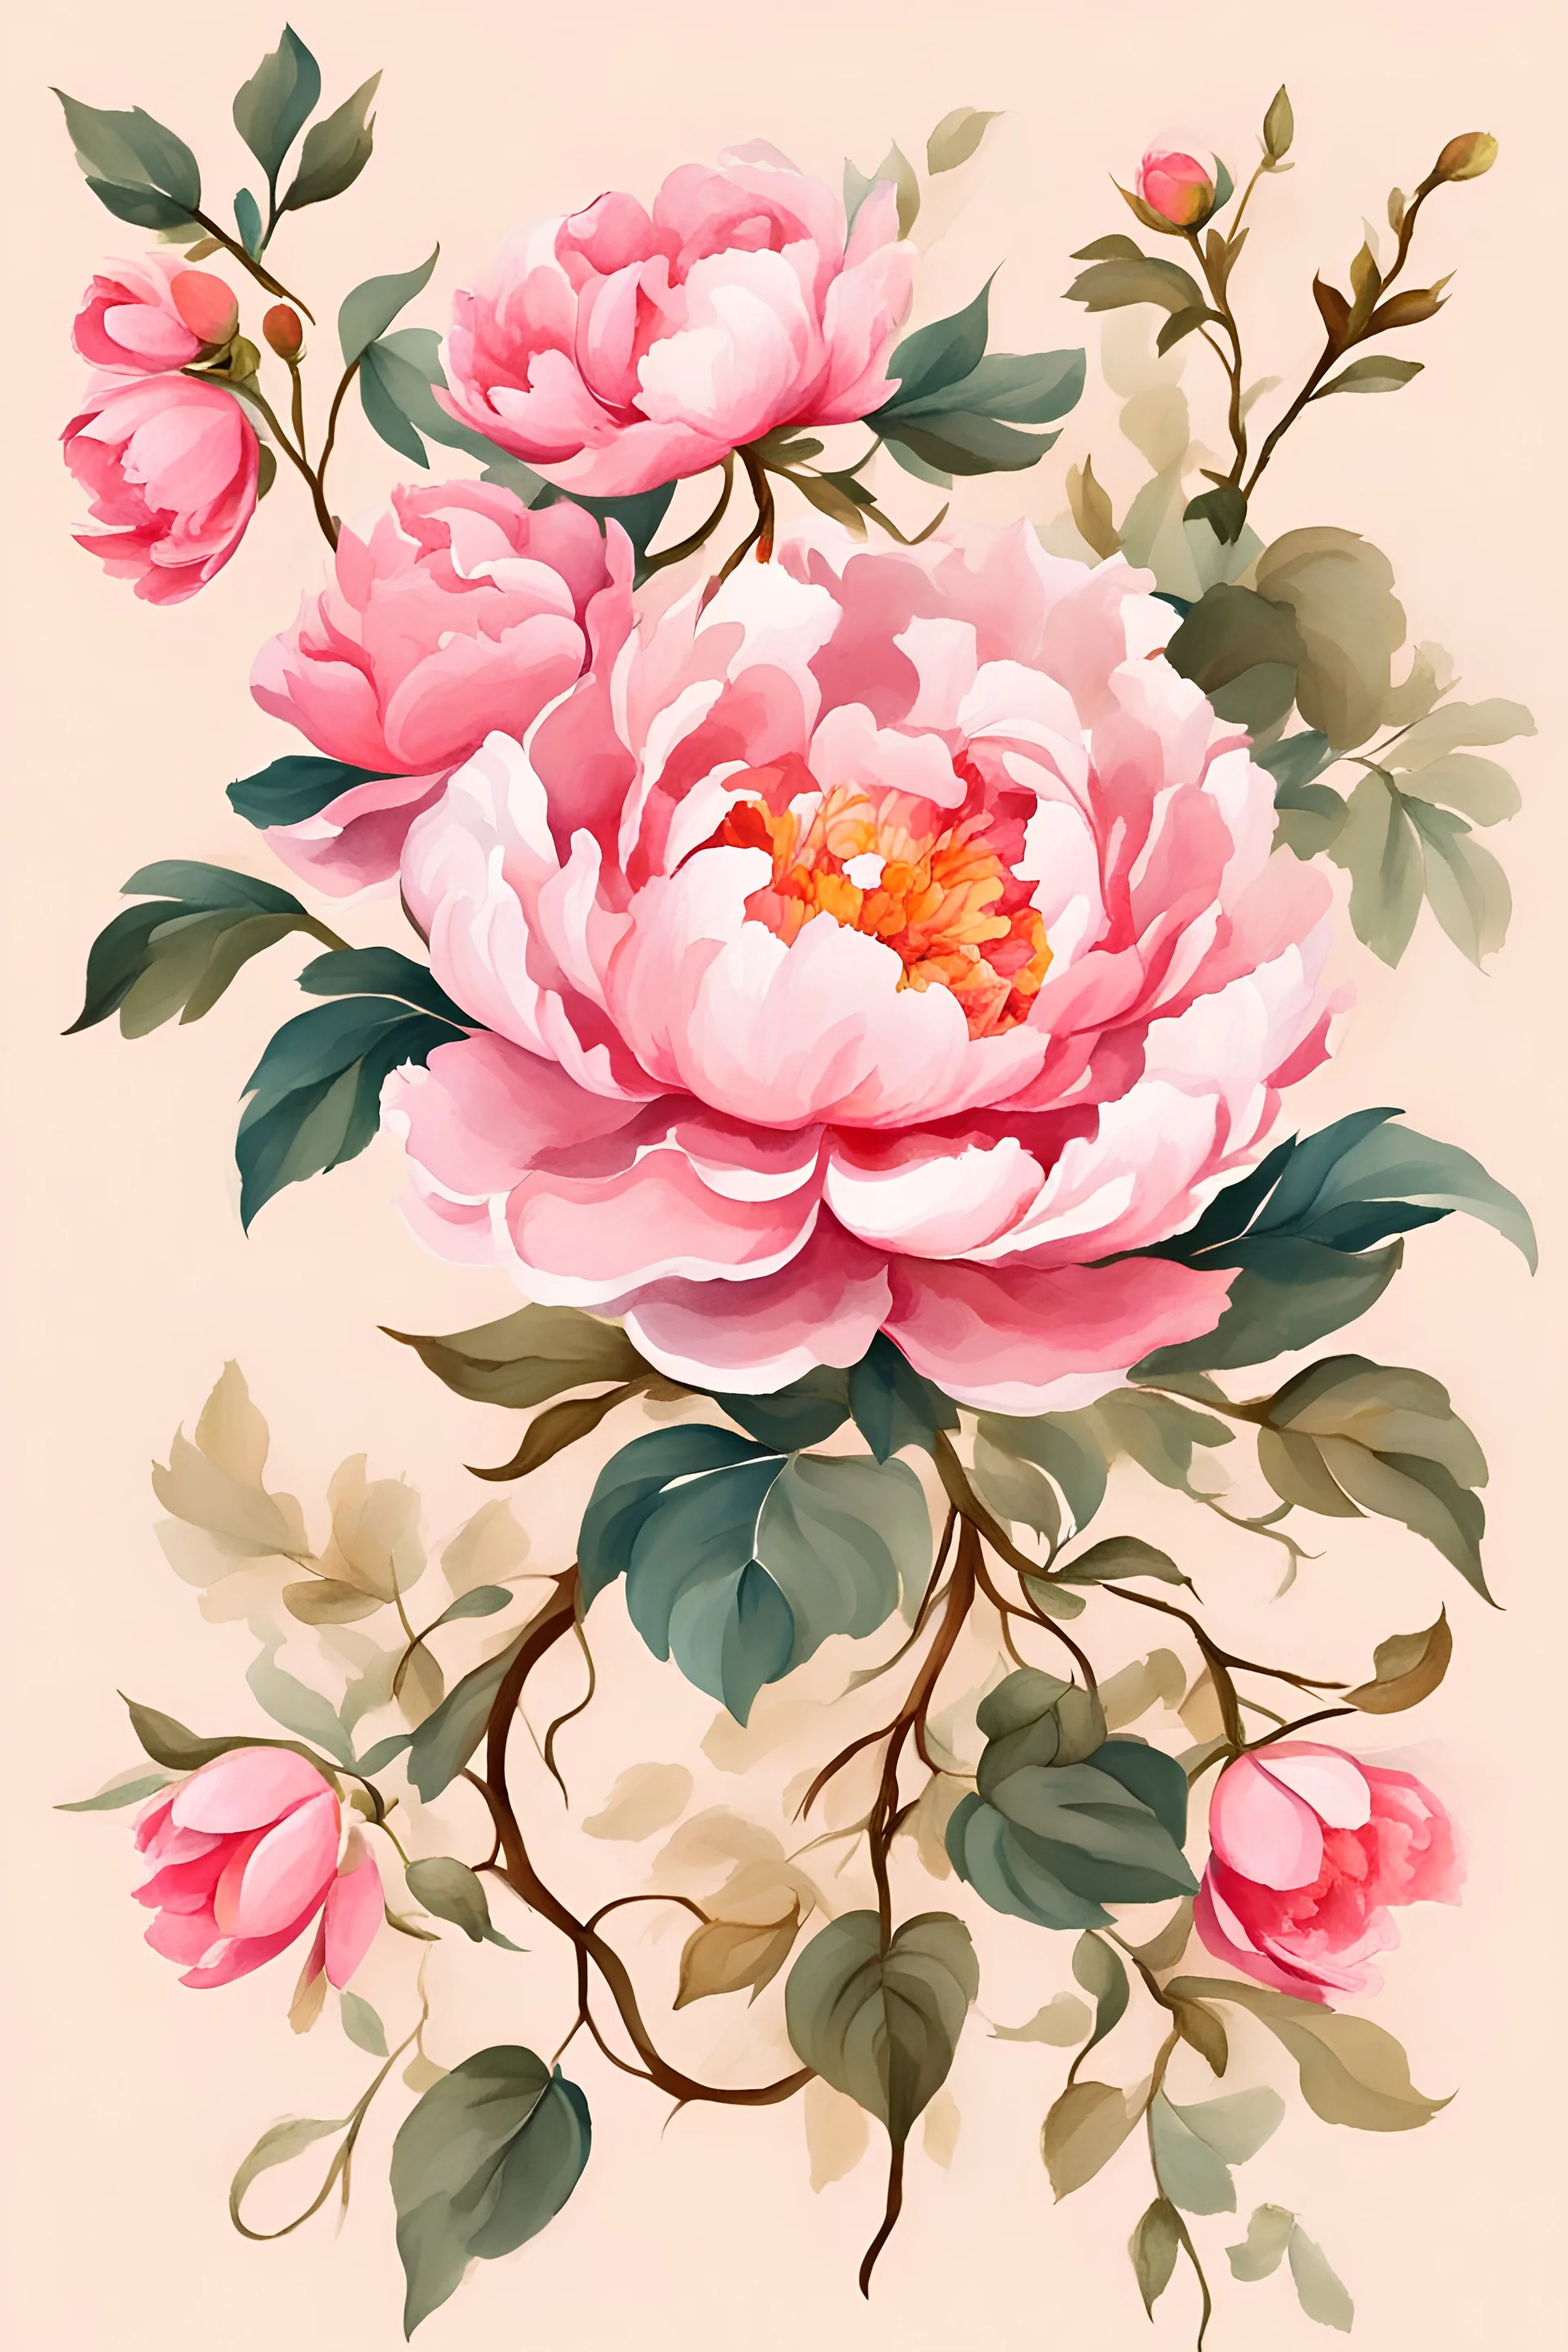 Simple composition abstract art, peony flowers on a vine, colorful and gorgeous, soft and gentle colors, soft beige background, four small flowers, vines, illustrations, two-dimensional animation, watercolor painting, gouache painting, rococo style